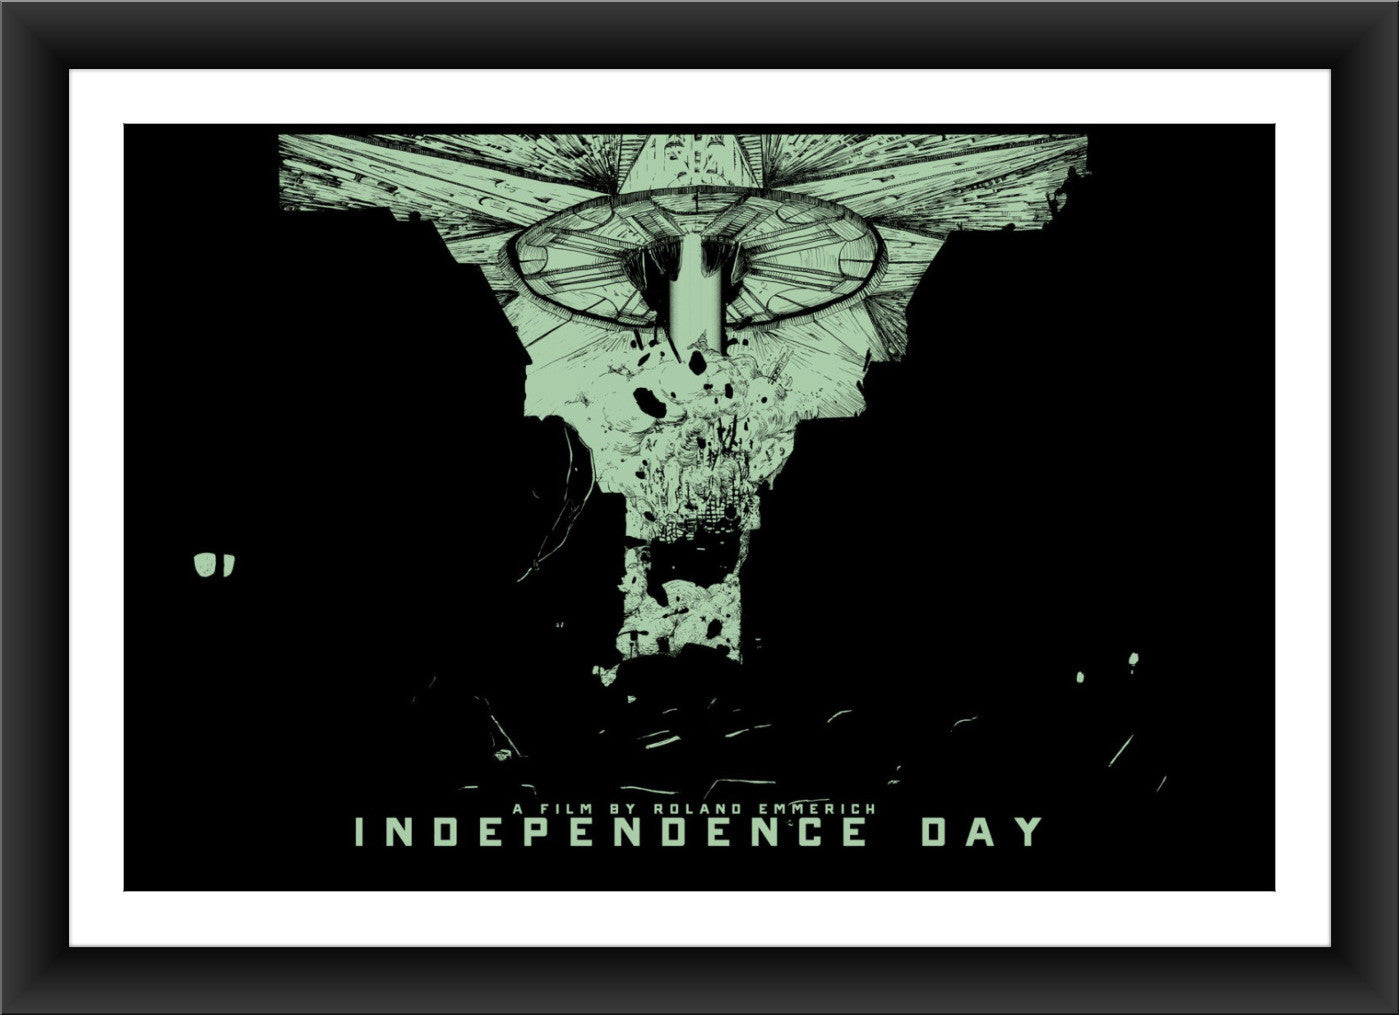 David Kloc "Independence Day" Official 20th Anniversary Print